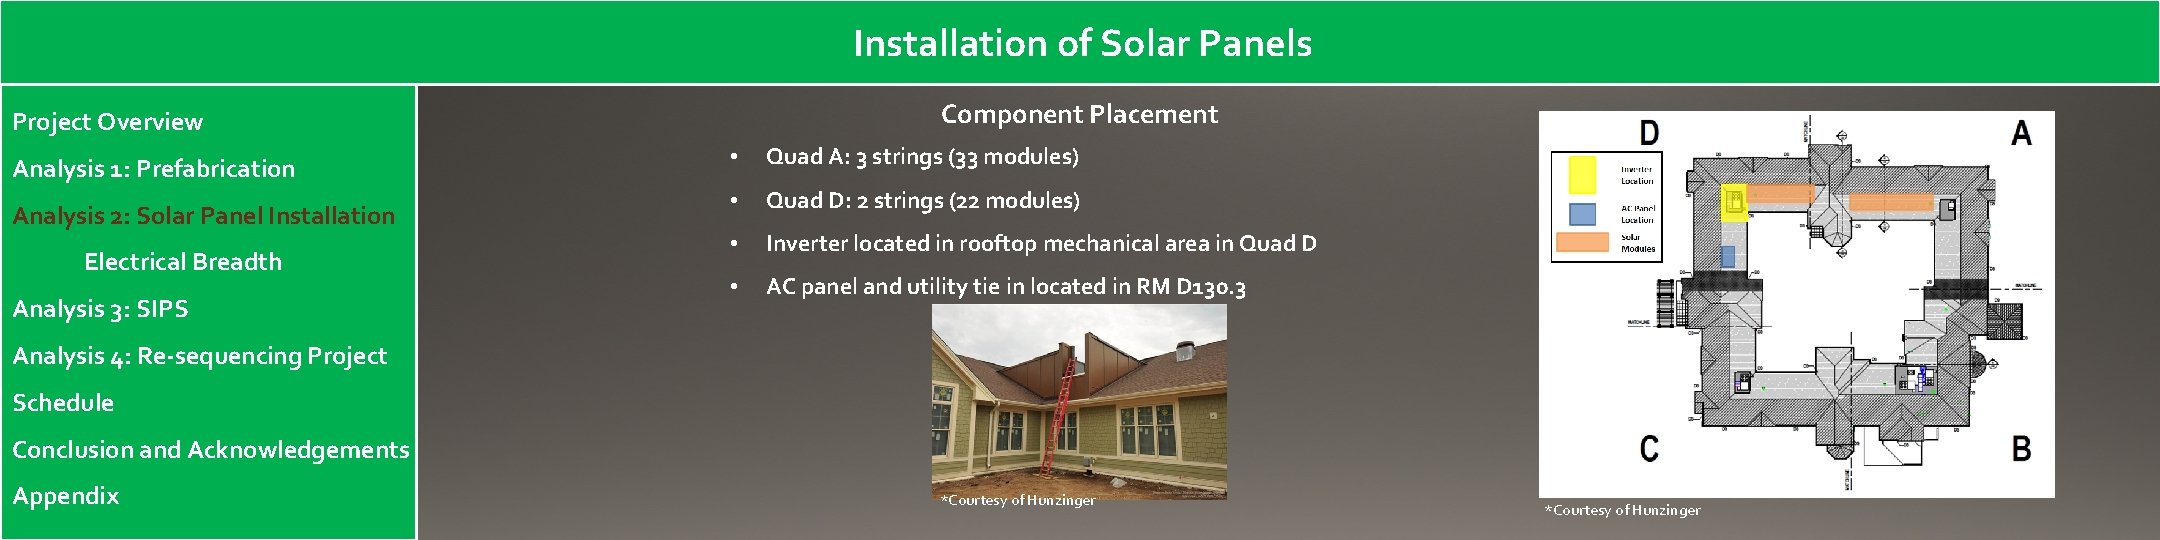 Installation of Solar Panels Component Placement Project Overview Analysis 1: Prefabrication Analysis 2: Solar